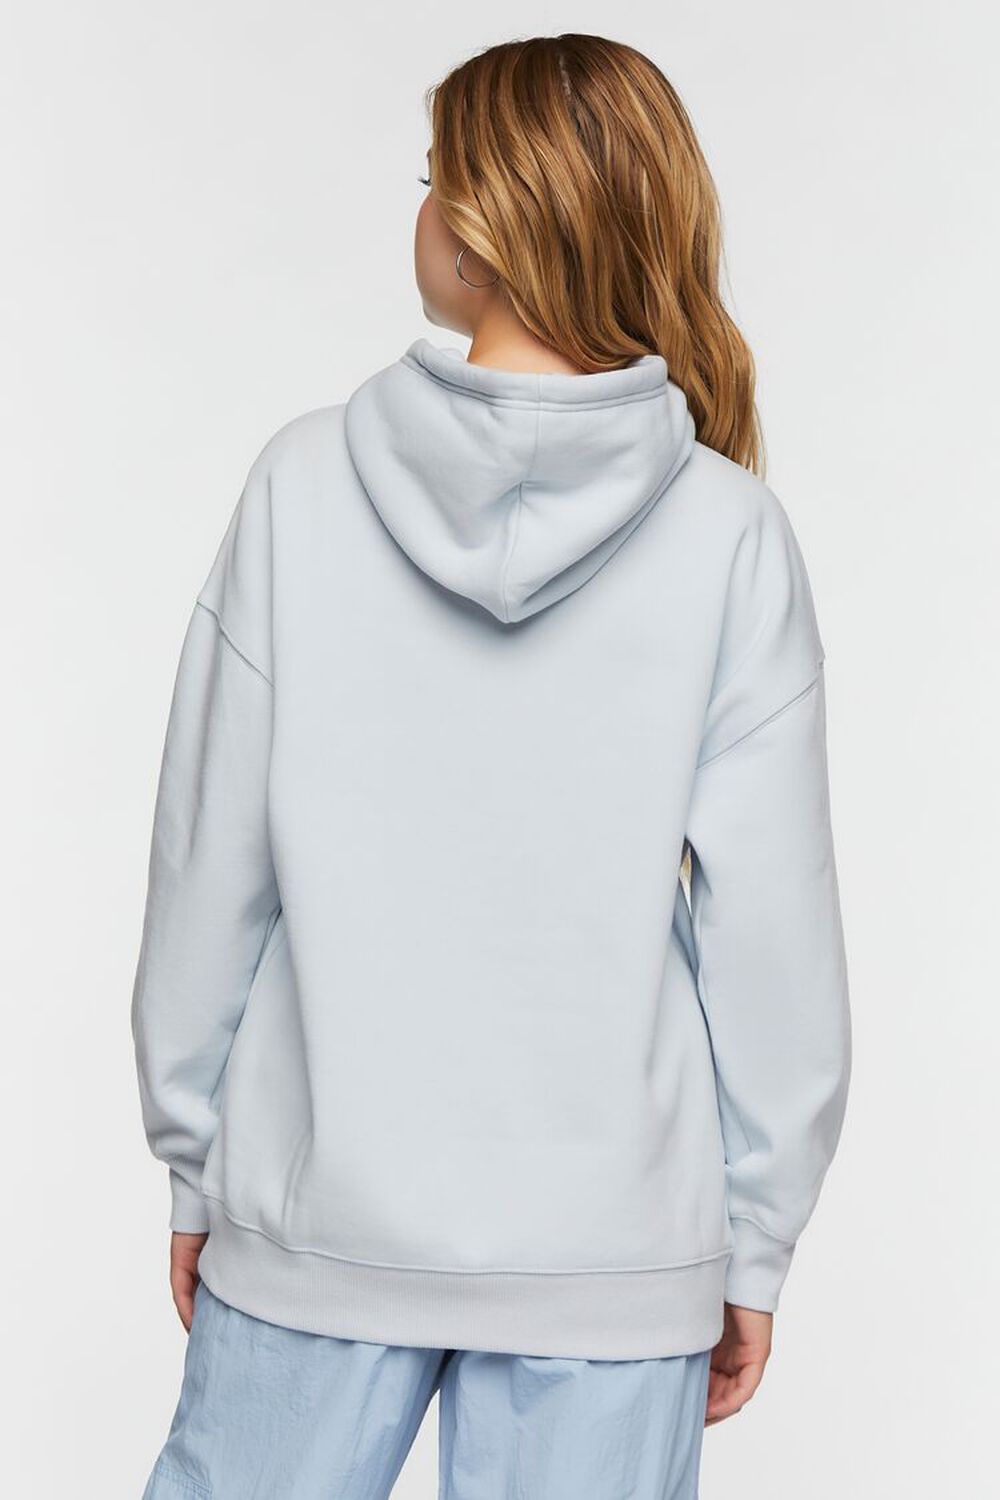 MISTY BLUE Organically Grown Cotton Hoodie, image 3